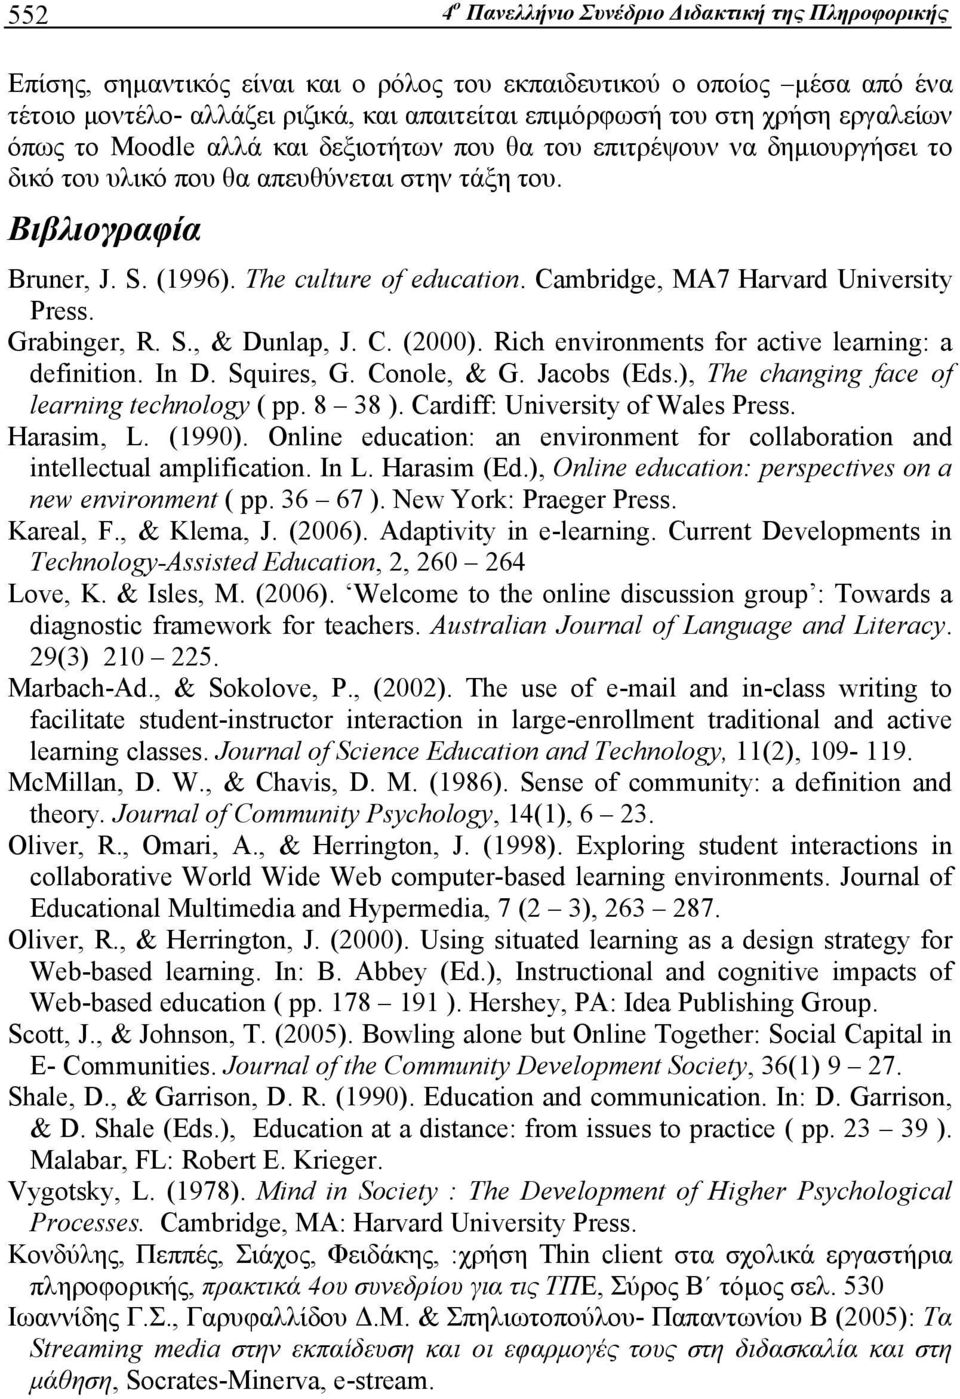 The culture of education. Cambridge, MA7 Harvard University Press. Grabinger, R. S., & Dunlap, J. C. (2000). Rich environments for active learning: a definition. In D. Squires, G. Conole, & G.